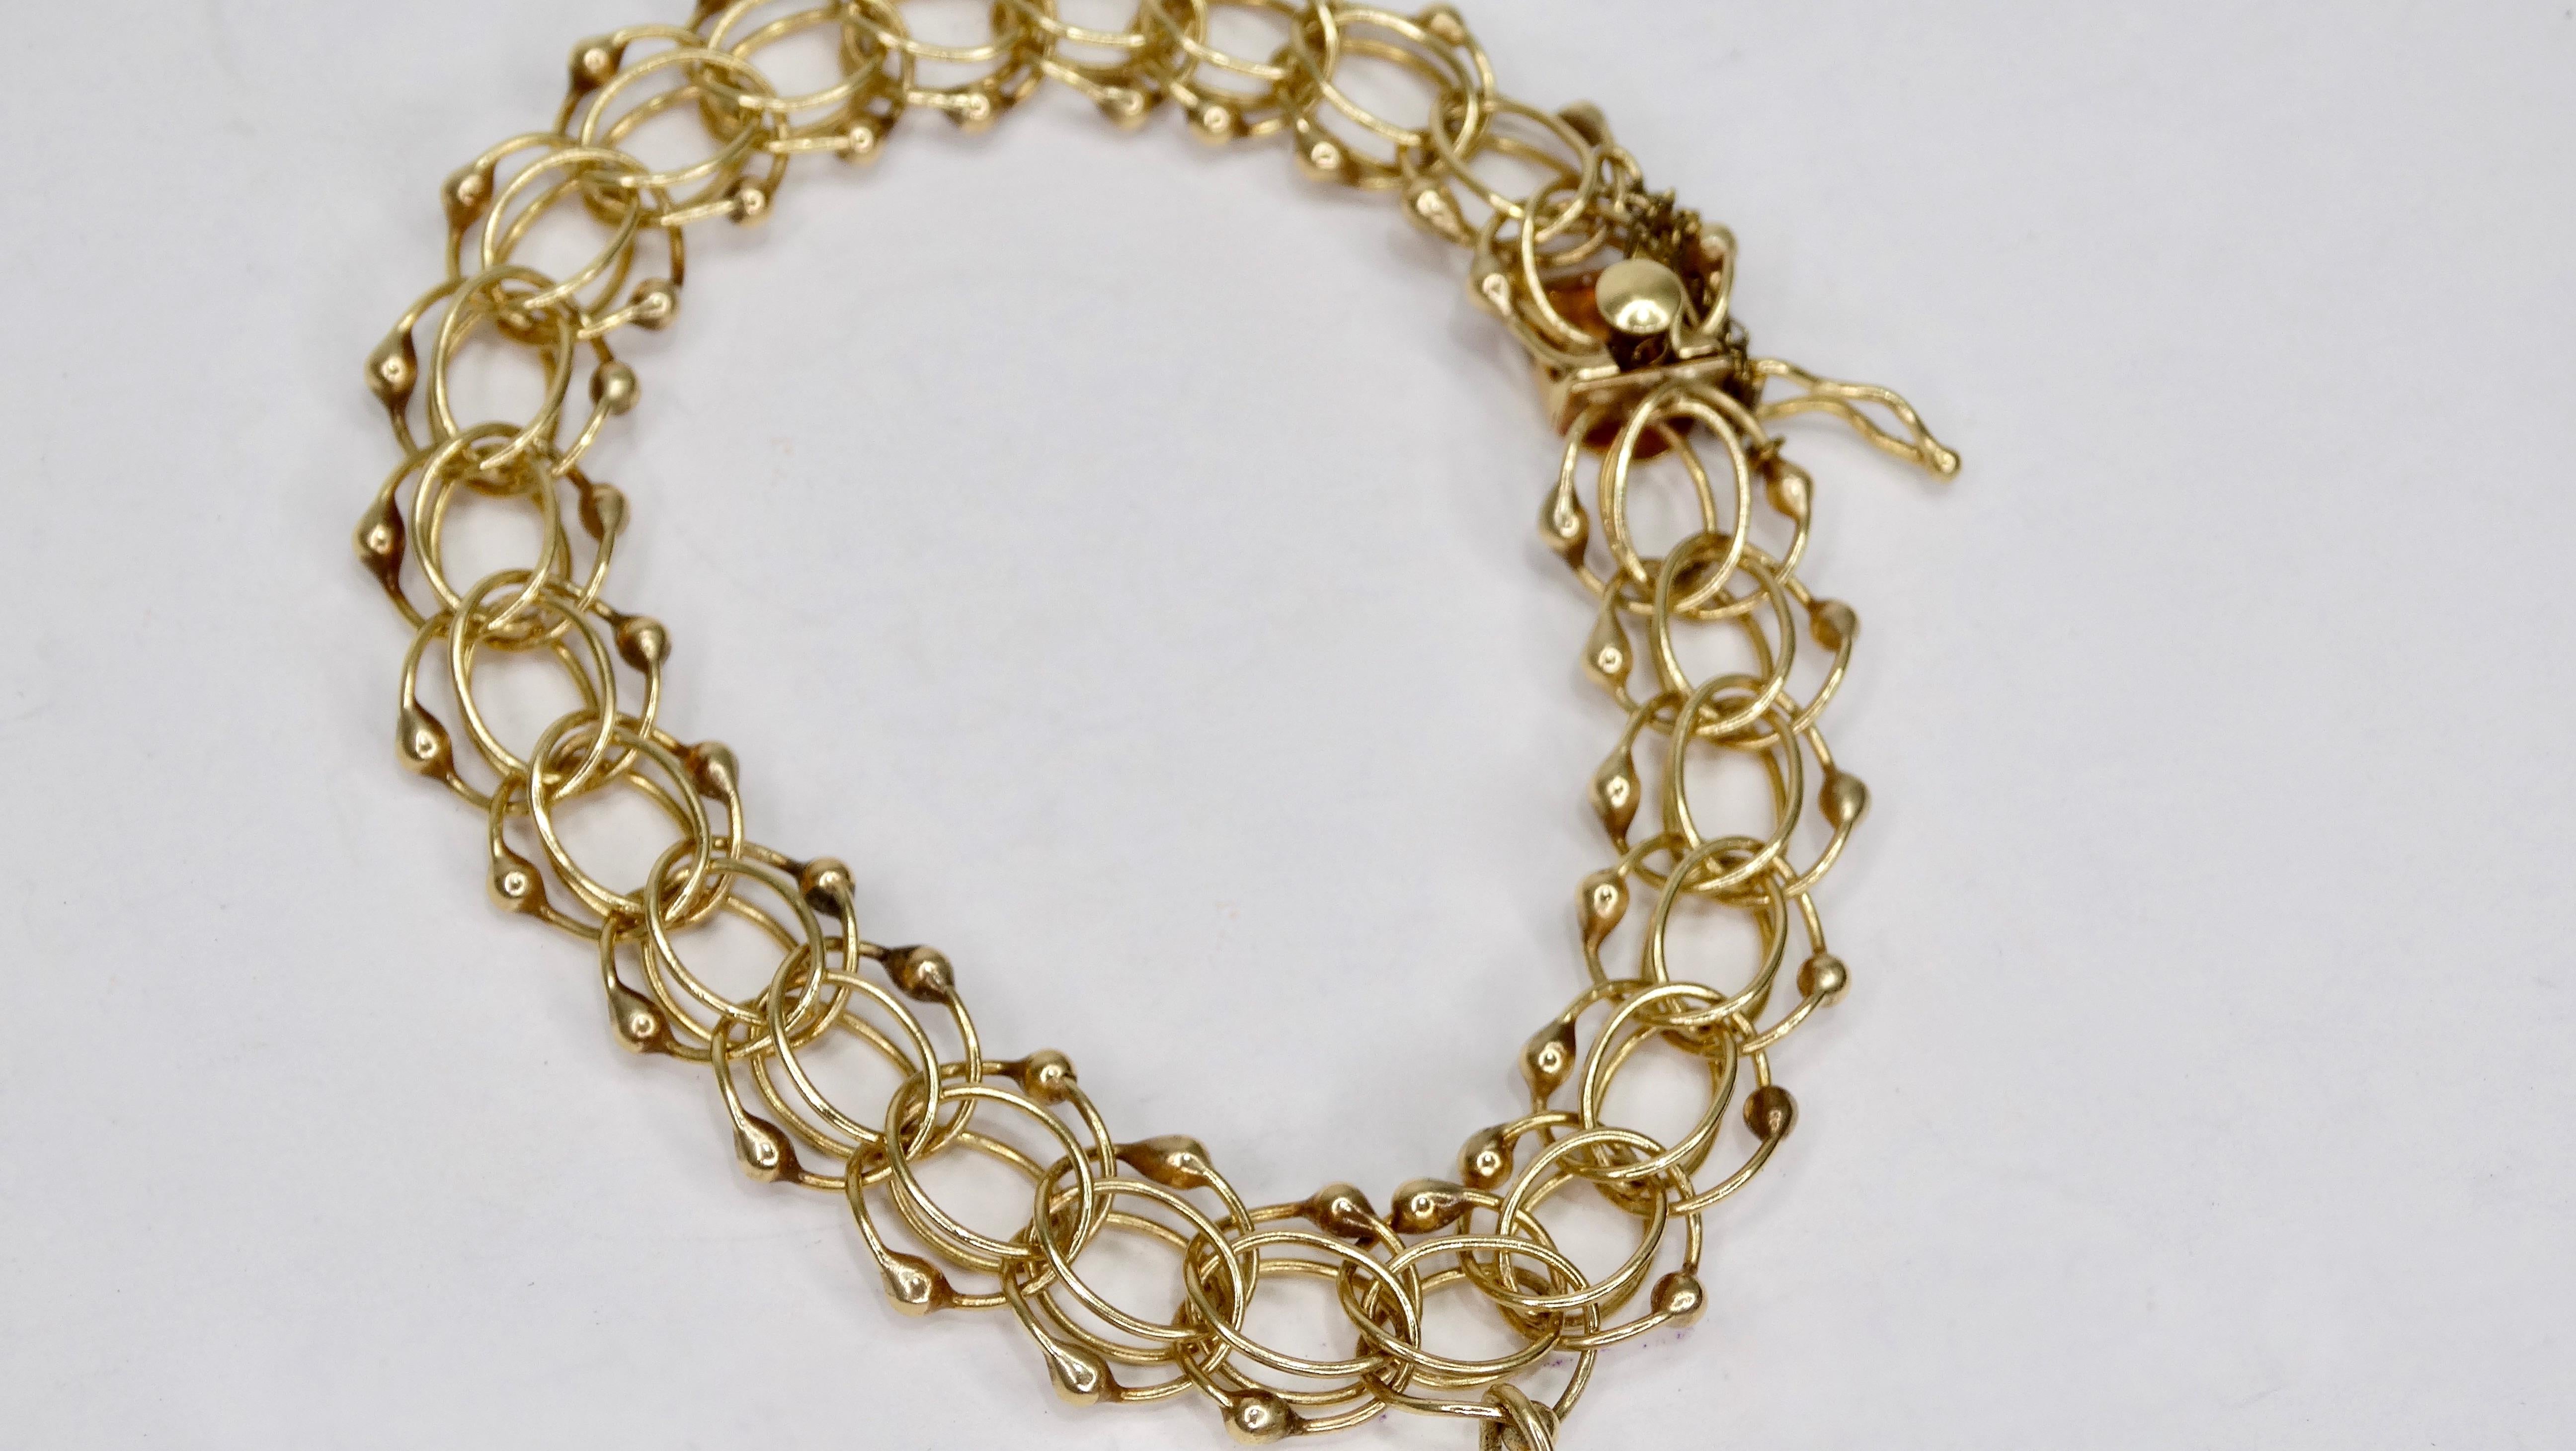 Stunning 14k Gold bracelet circa mid 20th century featuring a decorative multi chain link bracelet with a vintage heart locket charm. Tab closure. Best fit for a size 7-8